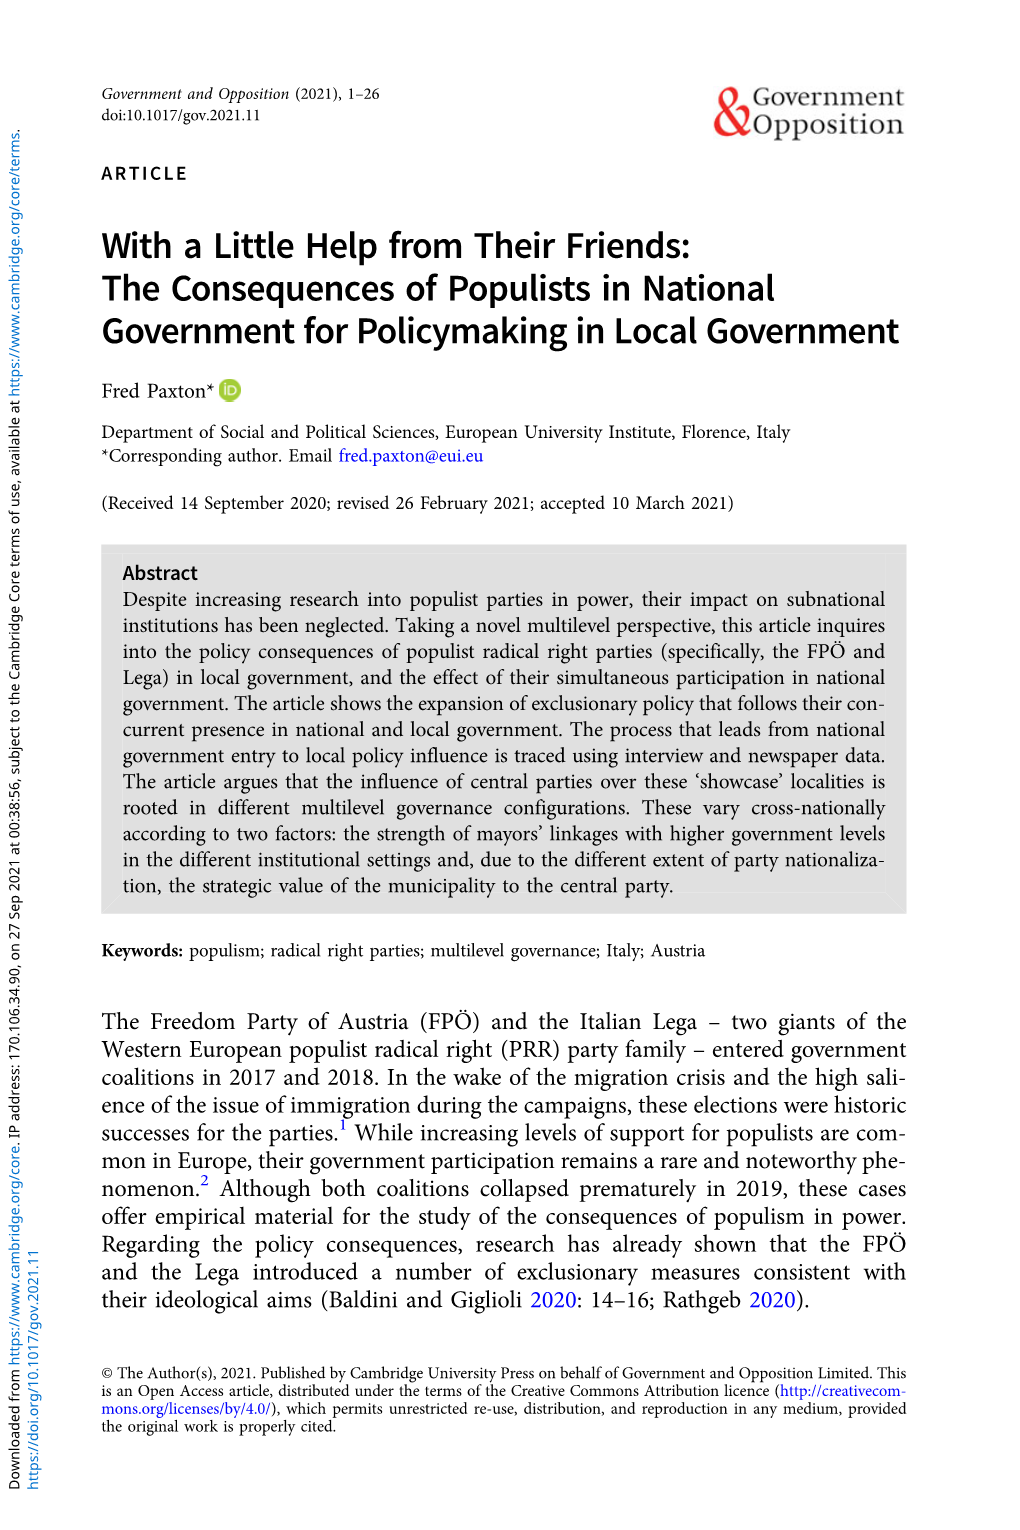 With a Little Help from Their Friends: the Consequences of Populists in National Government for Policymaking in Local Government